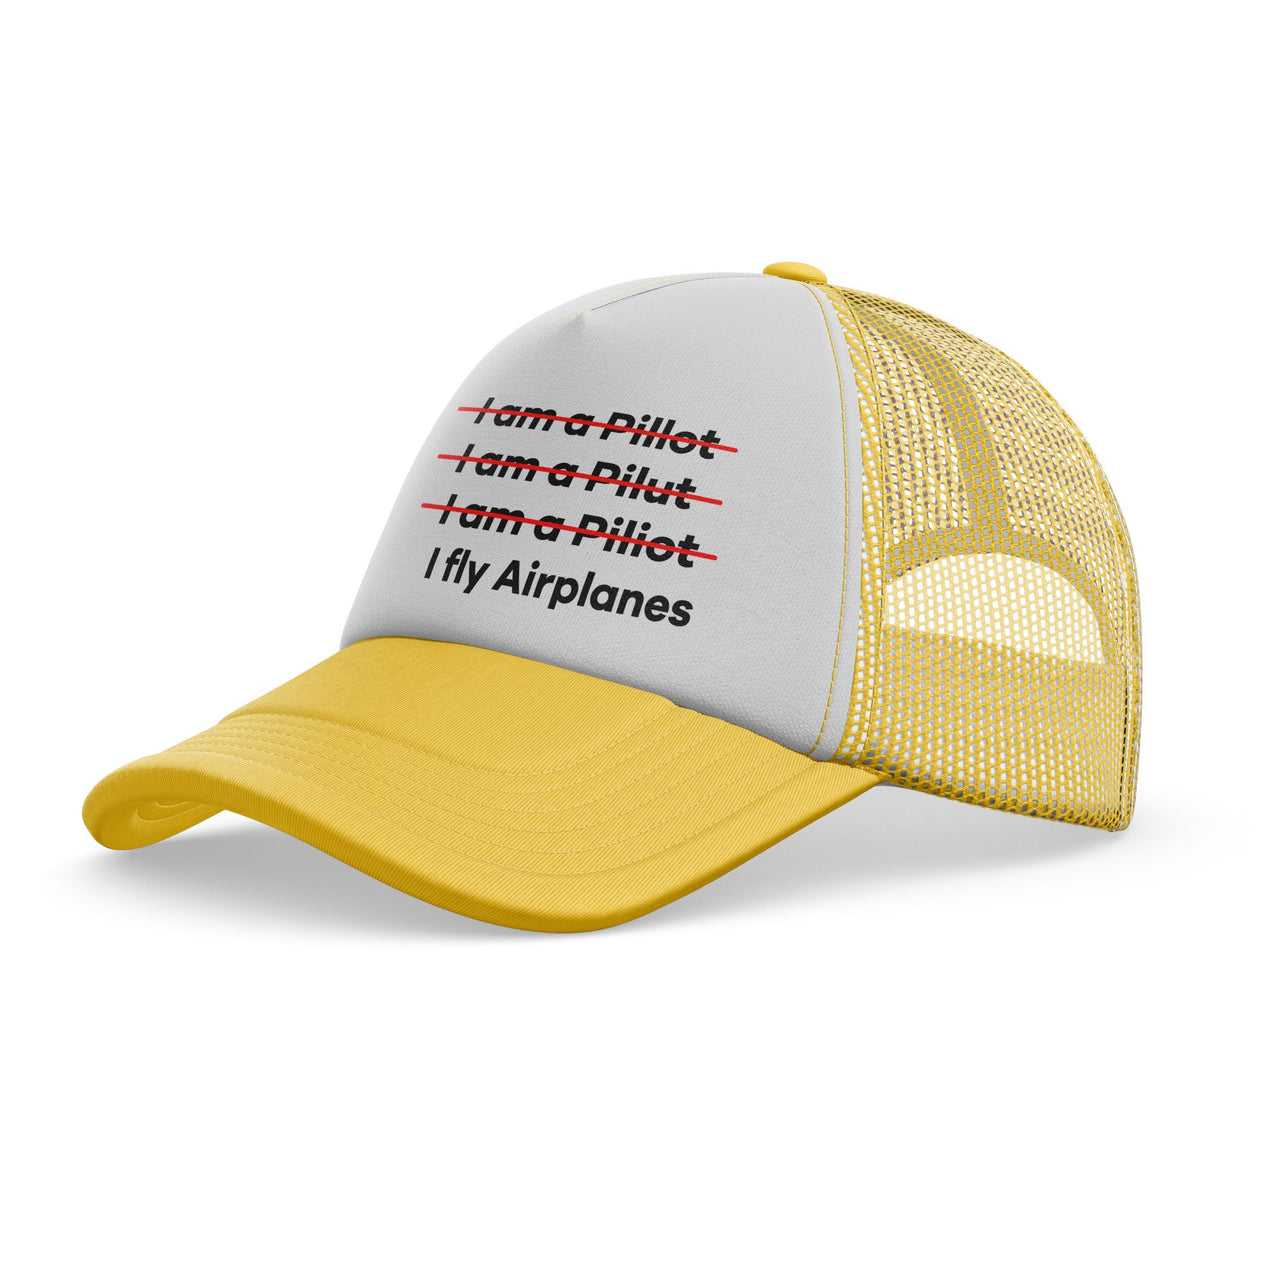 I Fly Airplanes Designed Trucker Caps & Hats